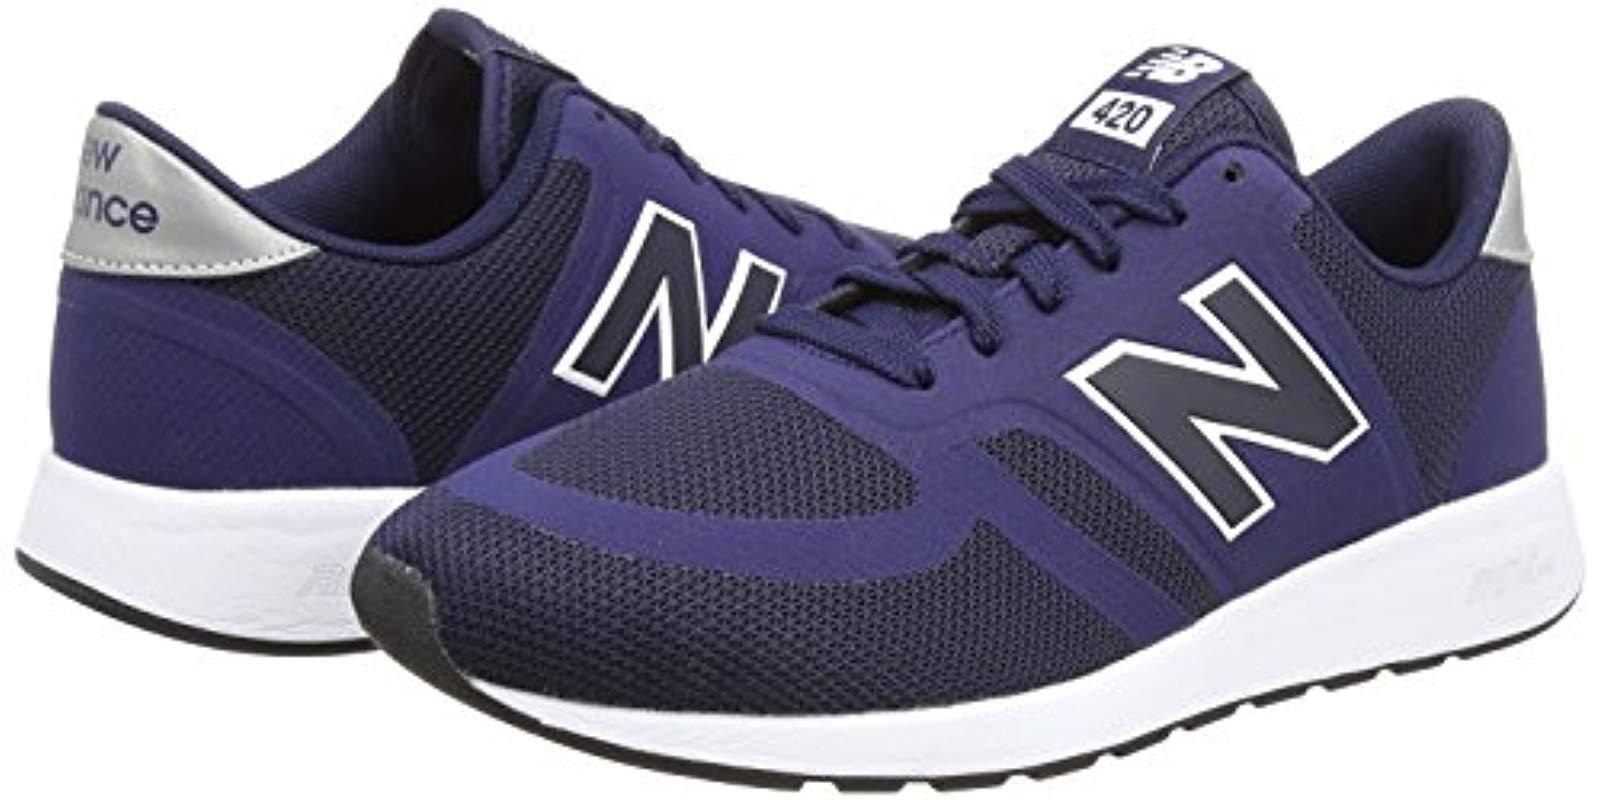 New Balance Mrl420v1 Trainers in Blue (Navy) (Blue) for Men - Save 15% -  Lyst